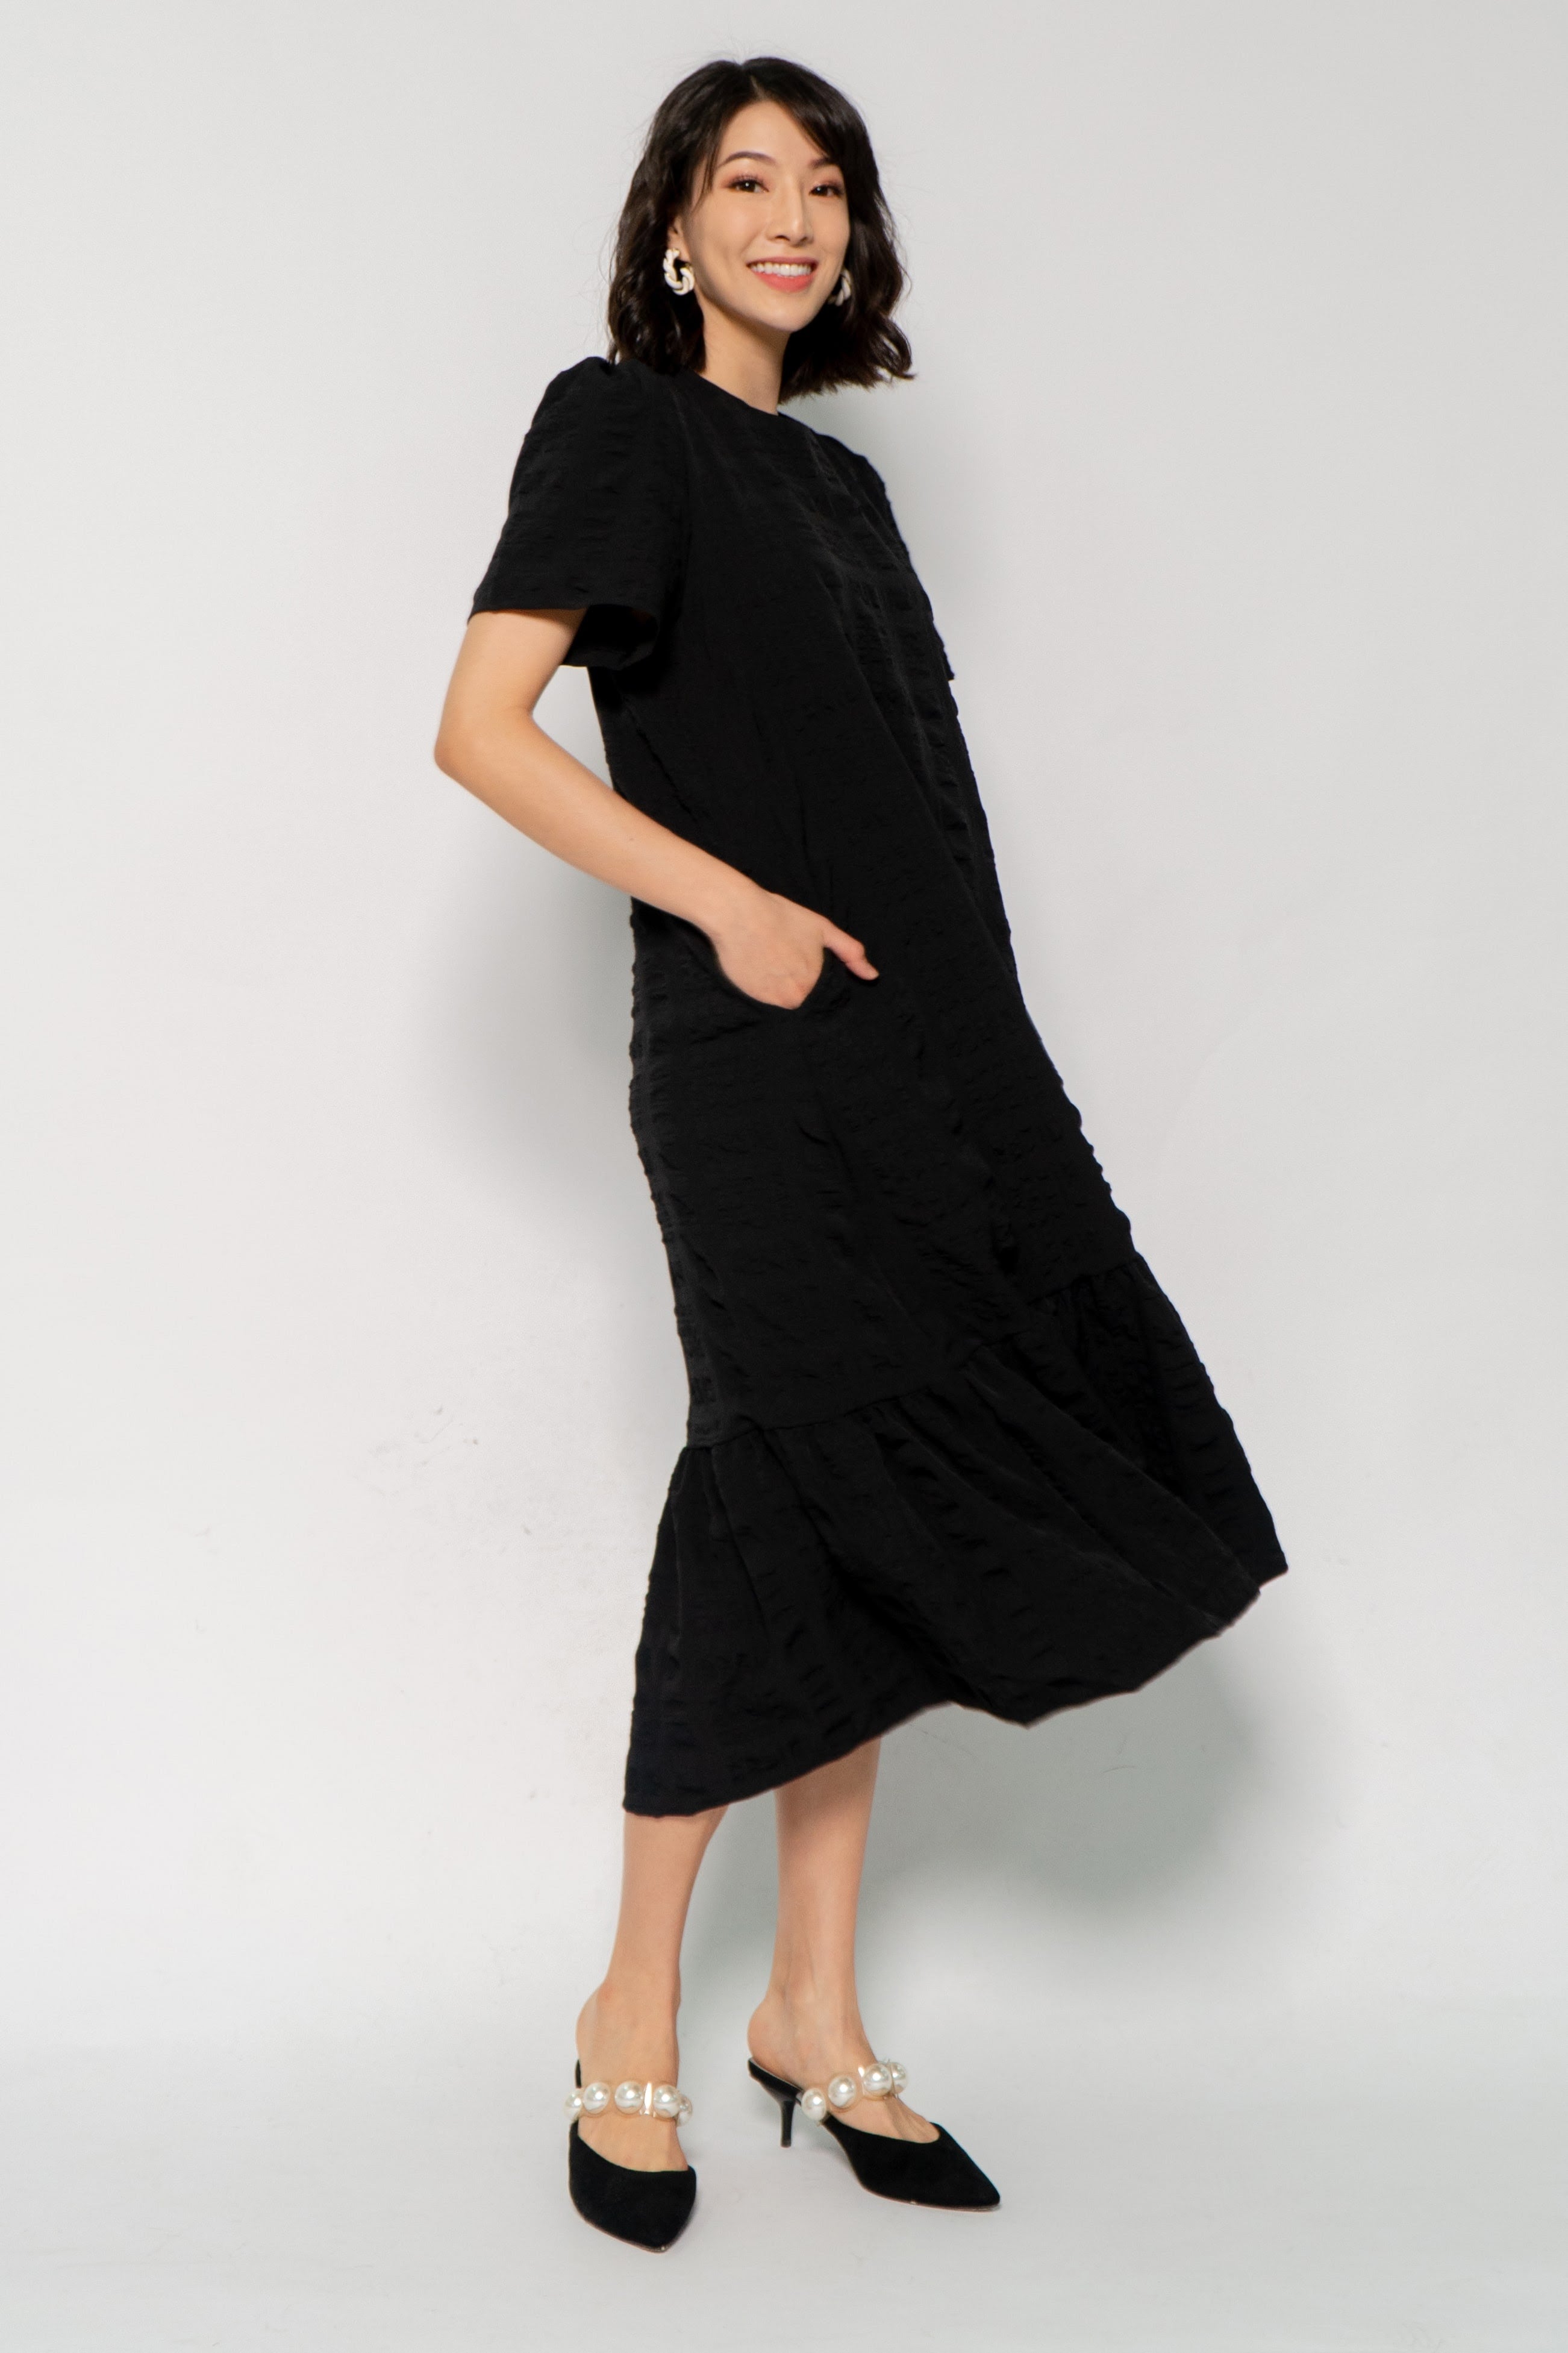 Xing Textured Dress in Black